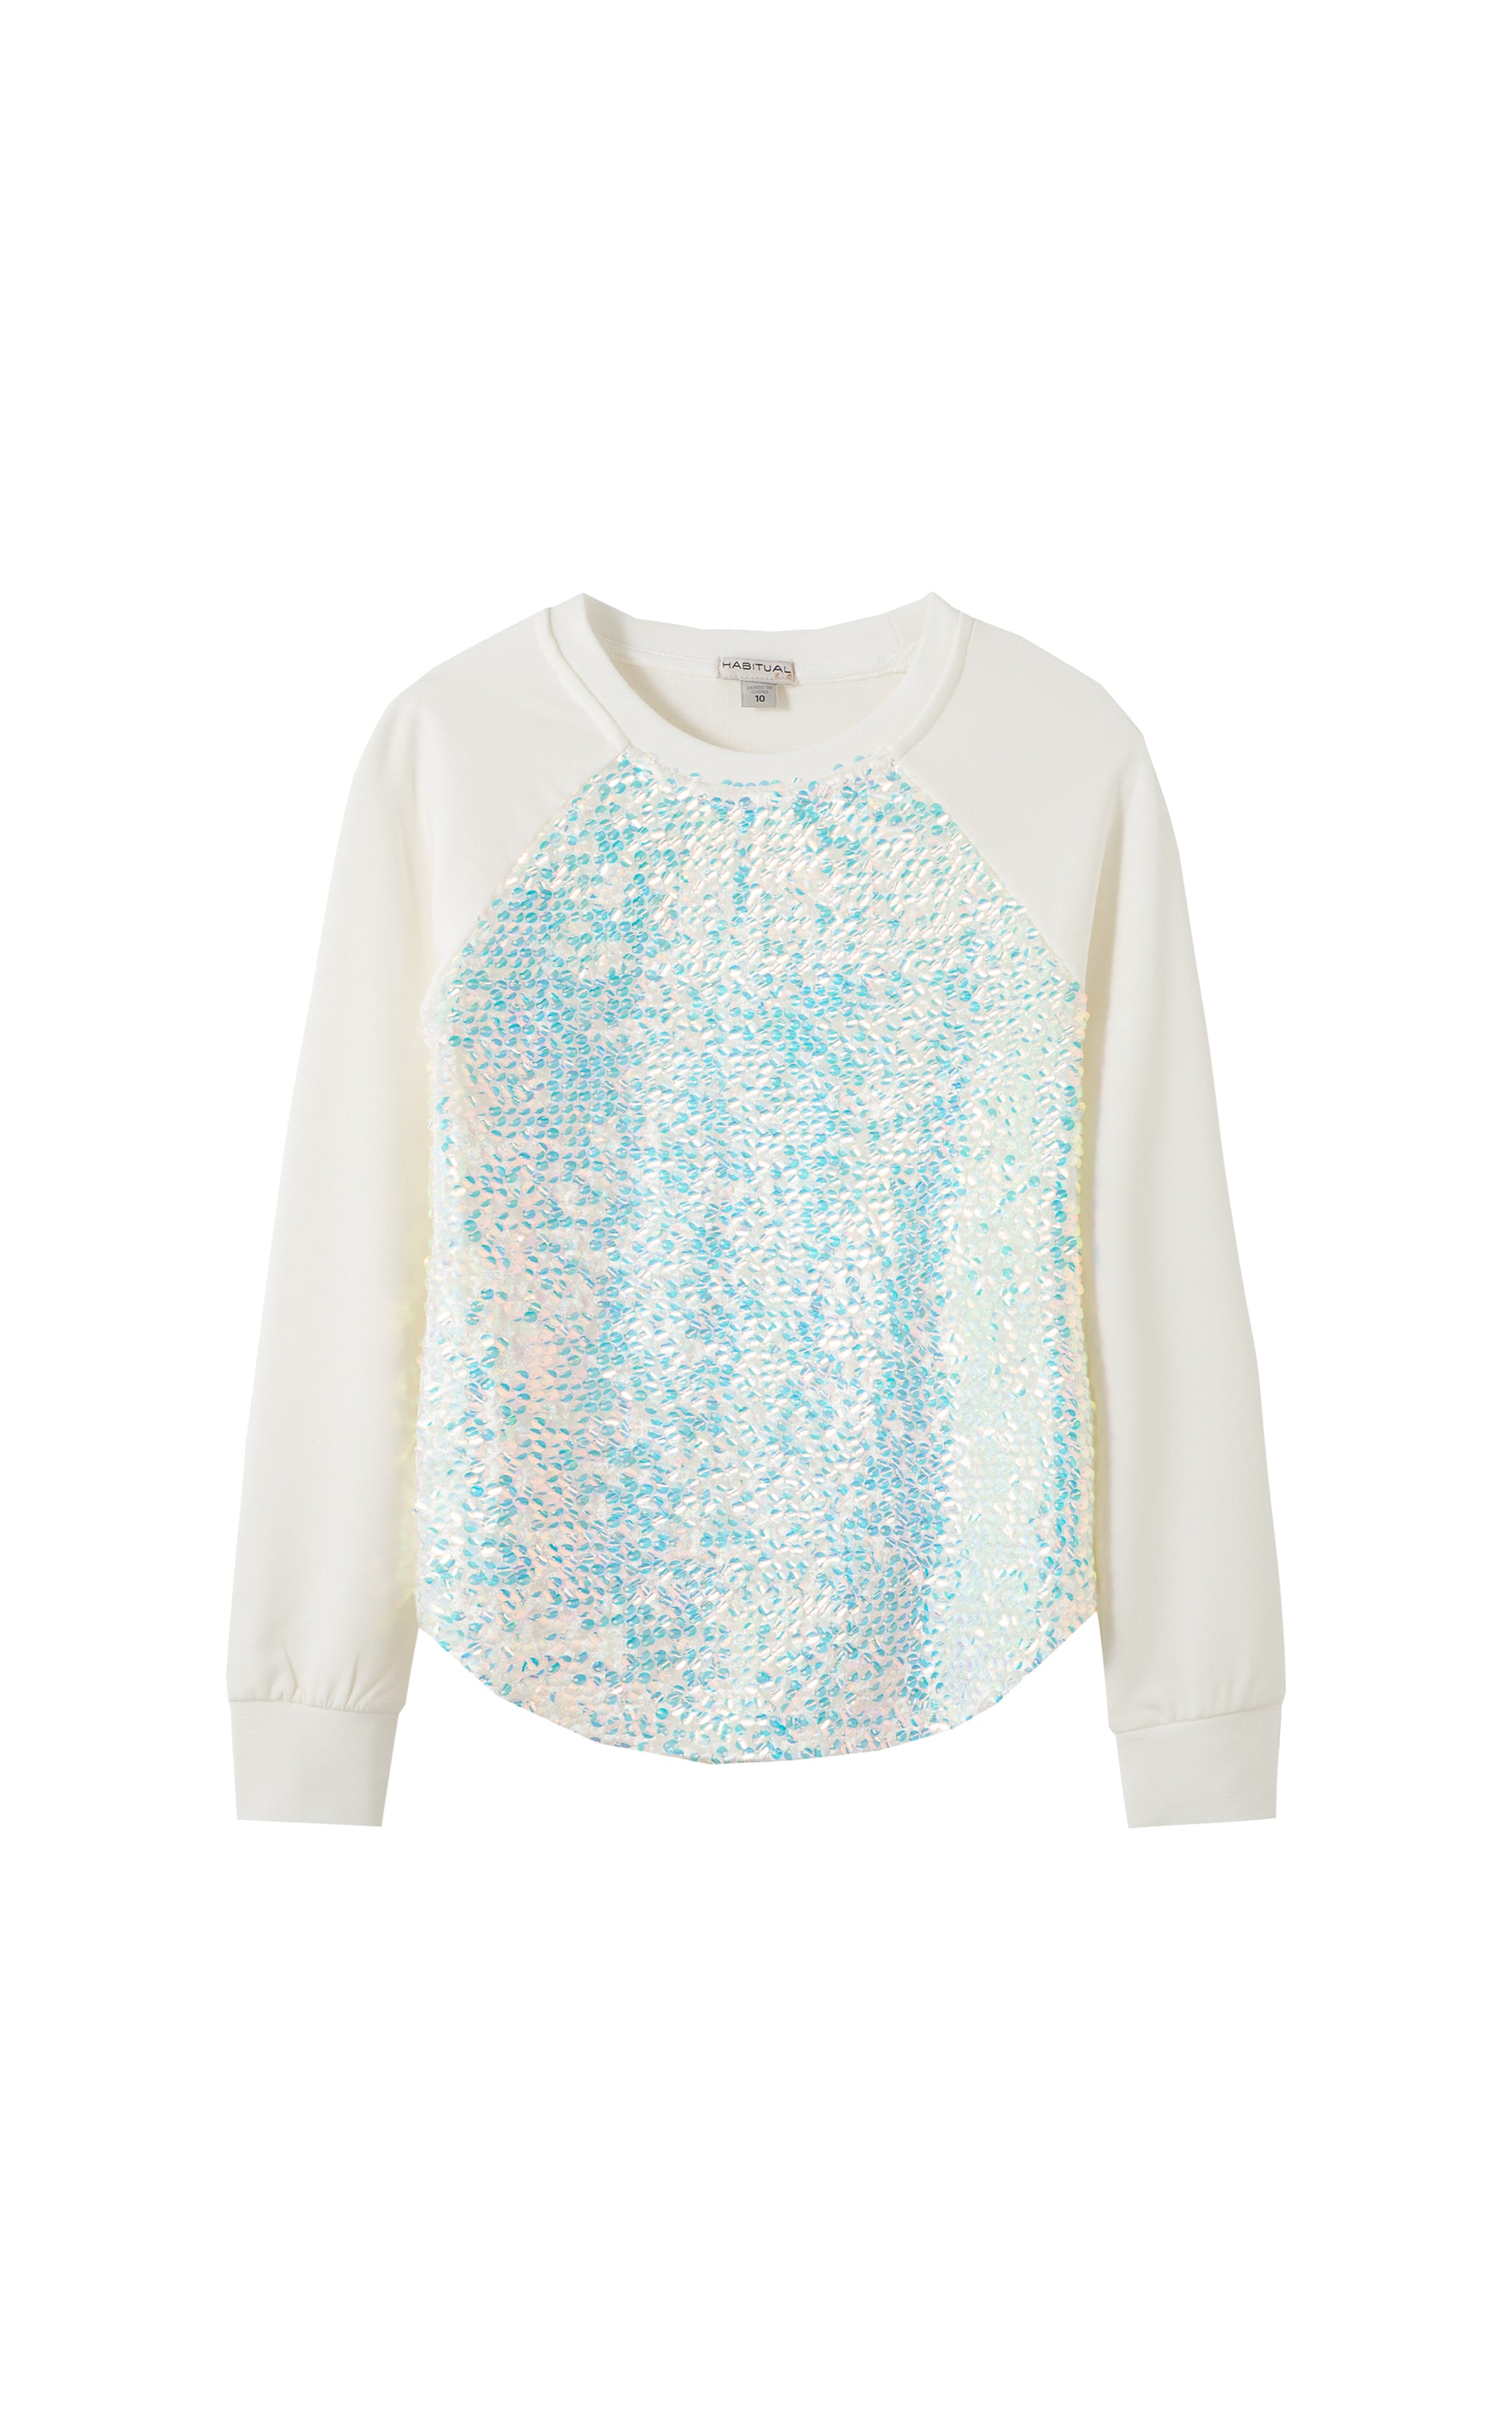 WHITE LONG-SLEEVE TOP WITH PEARLY BLUE SEQUINS